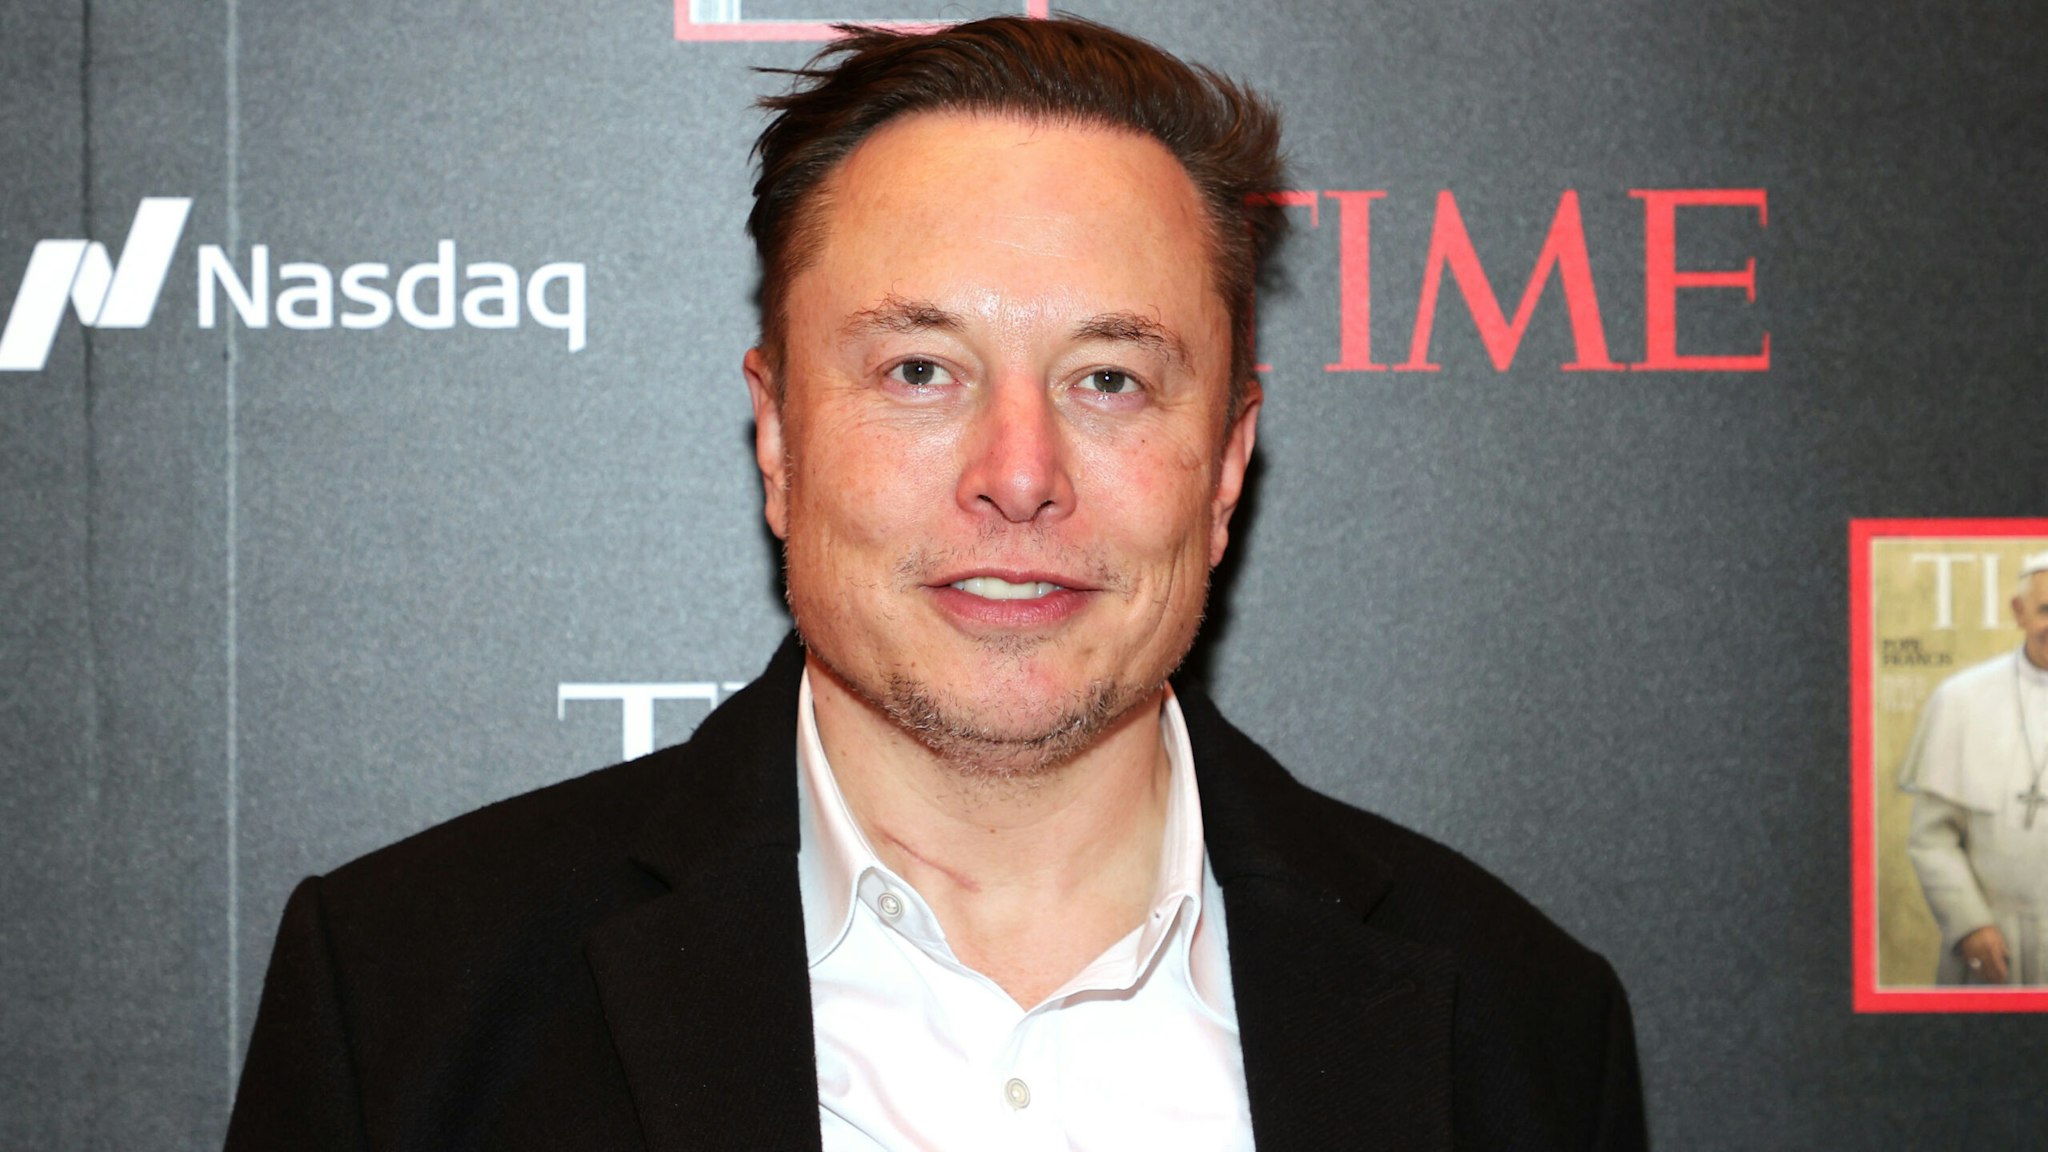 NEW YORK, NEW YORK - DECEMBER 13: Elon Musk attends TIME Person of the Year on December 13, 2021 in New York City.